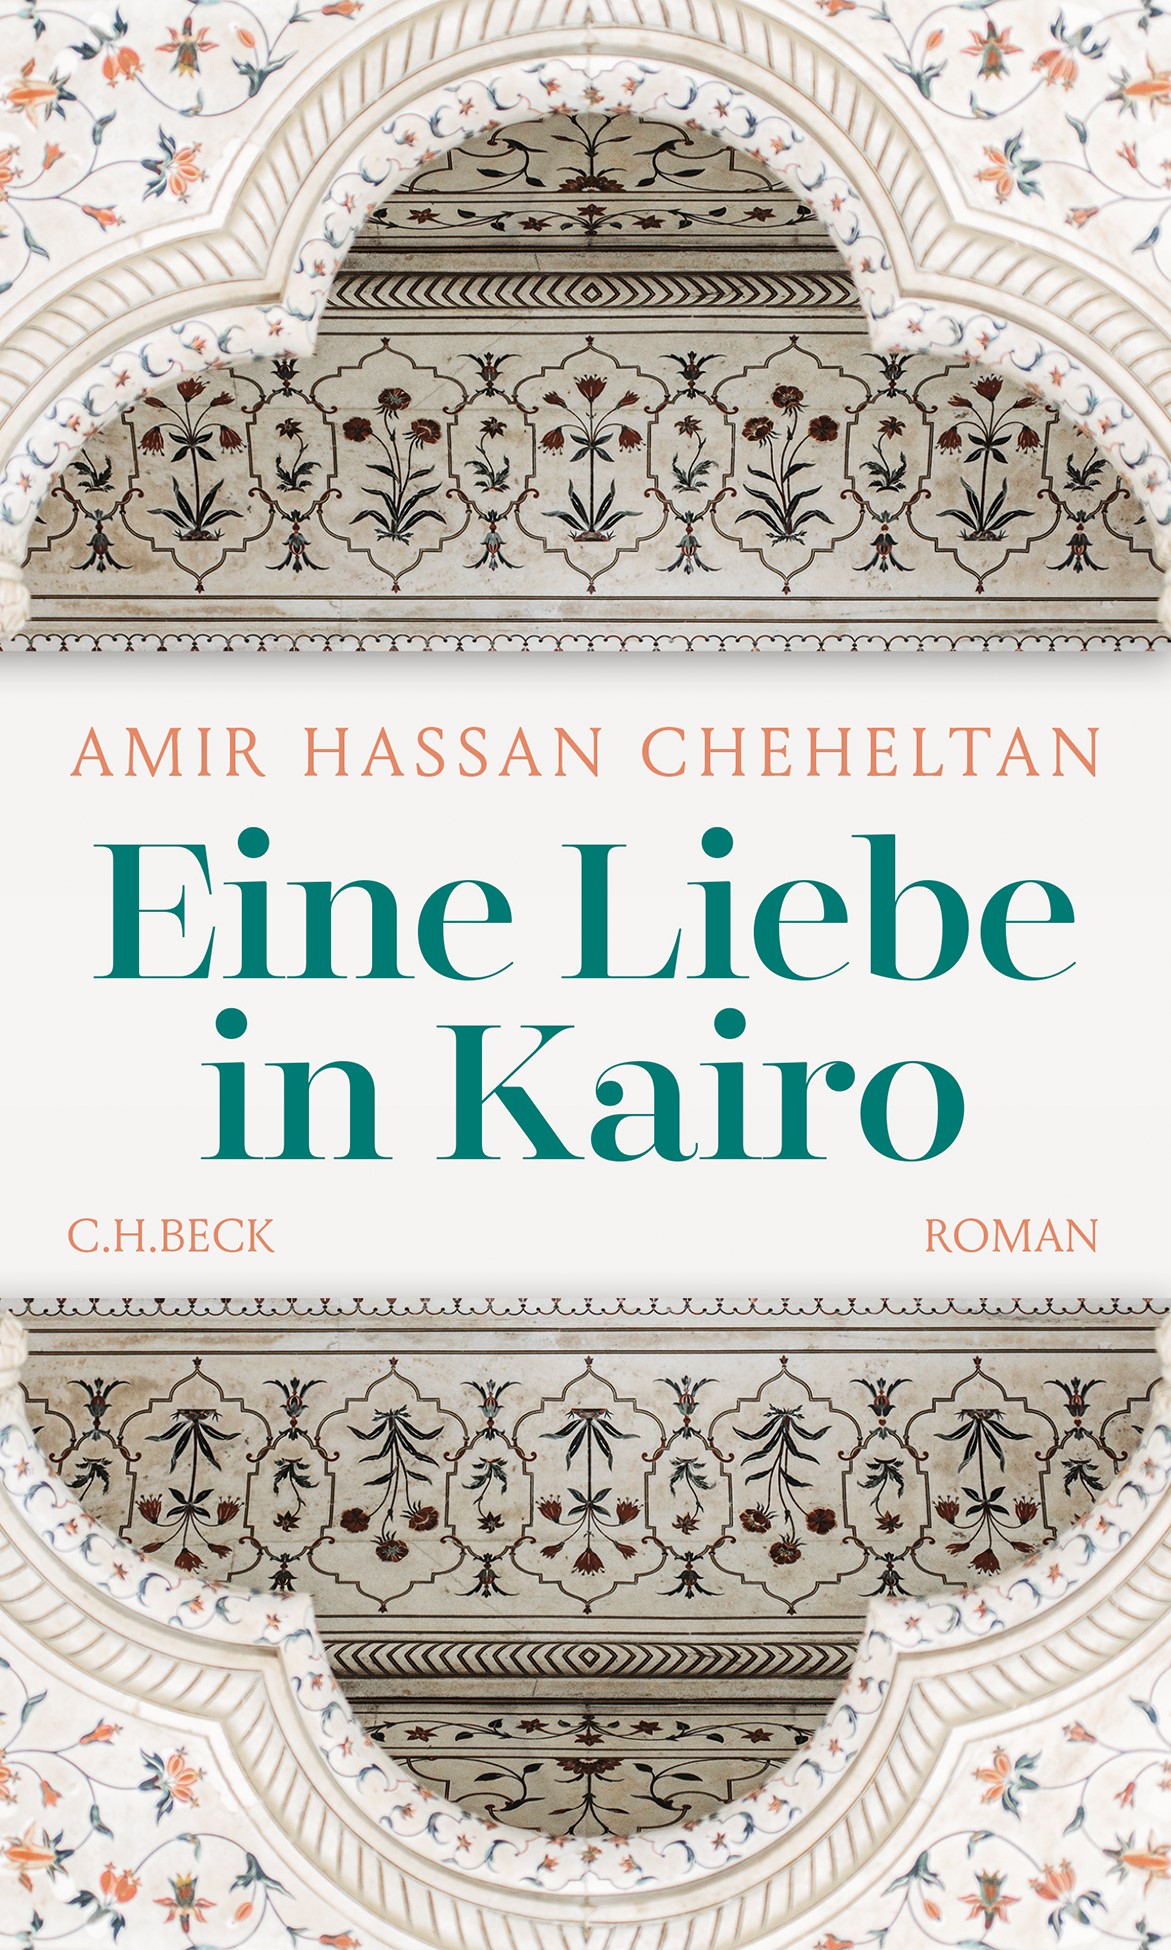 Cover of Amir Hassan Cheheltan's "Eine Liebe in Cairo", 'A love in Cairo', translated from the Persian by JUtta Himmelreich and published in German by C. H. Beck (source: C. H. Beck)